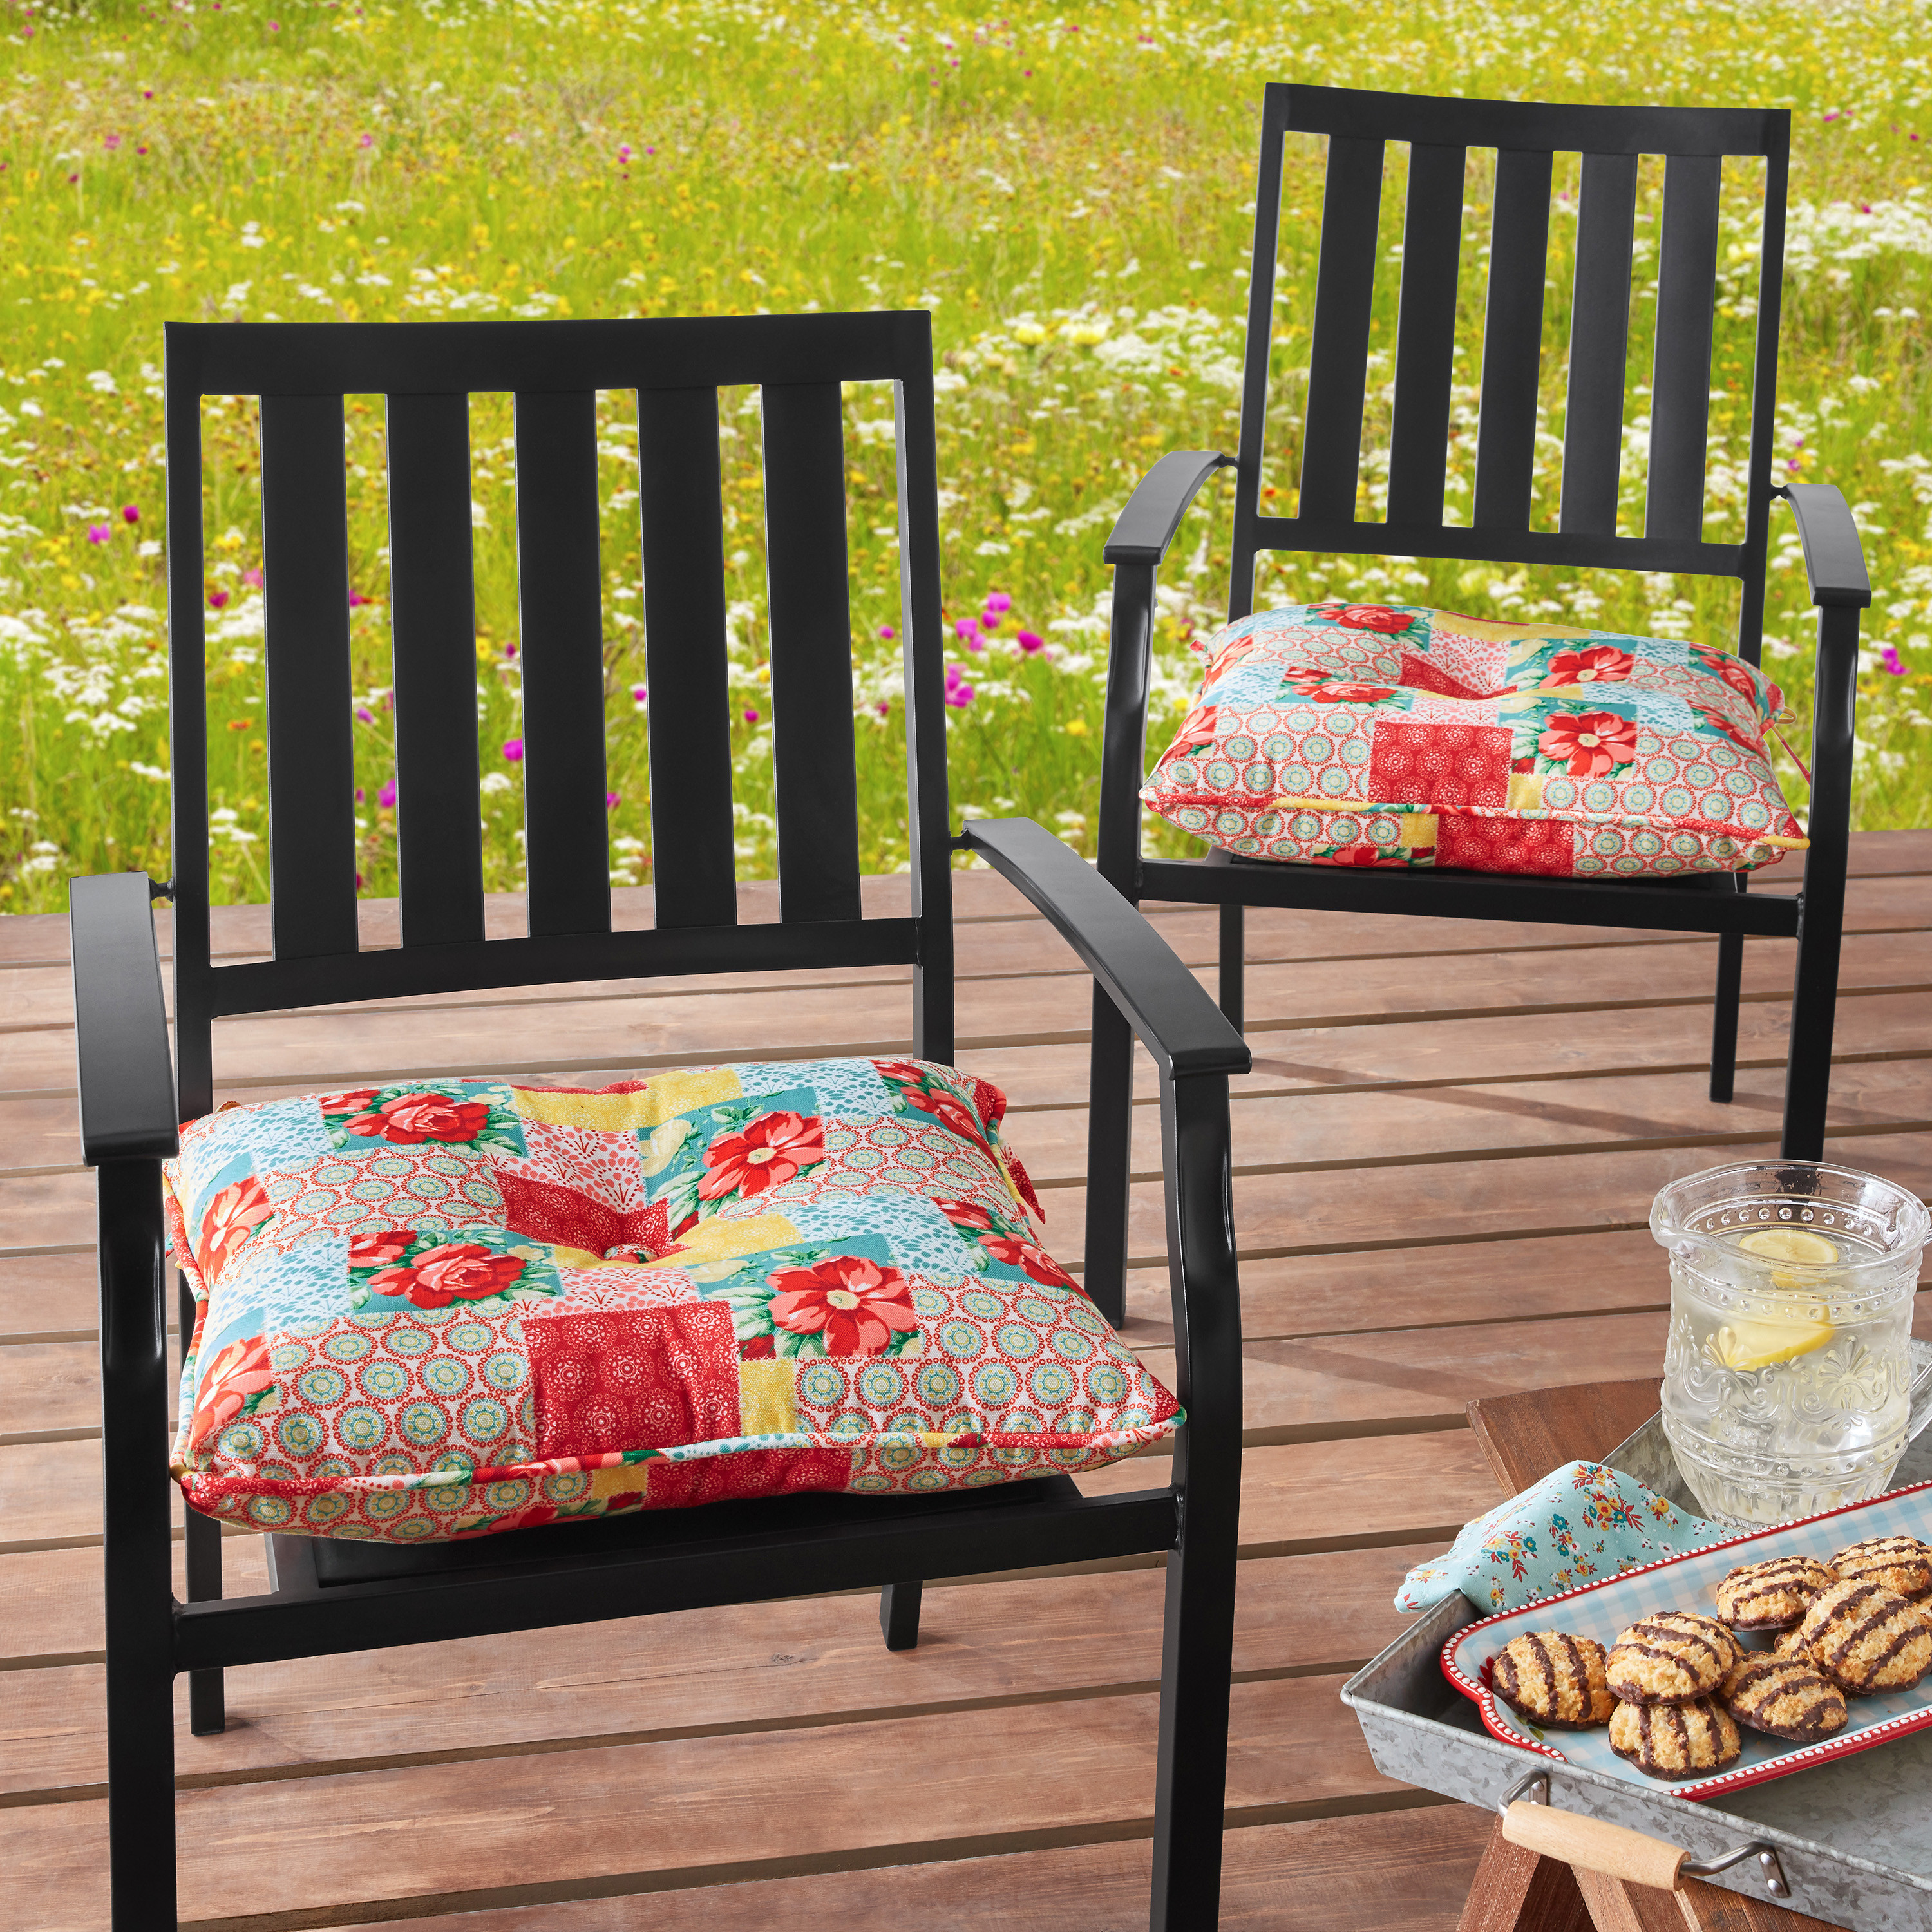 The Pioneer Woman 18" x 19" Multi-color Floral Patchwork Outdoor Seat Pad, 2 Pack - image 2 of 8